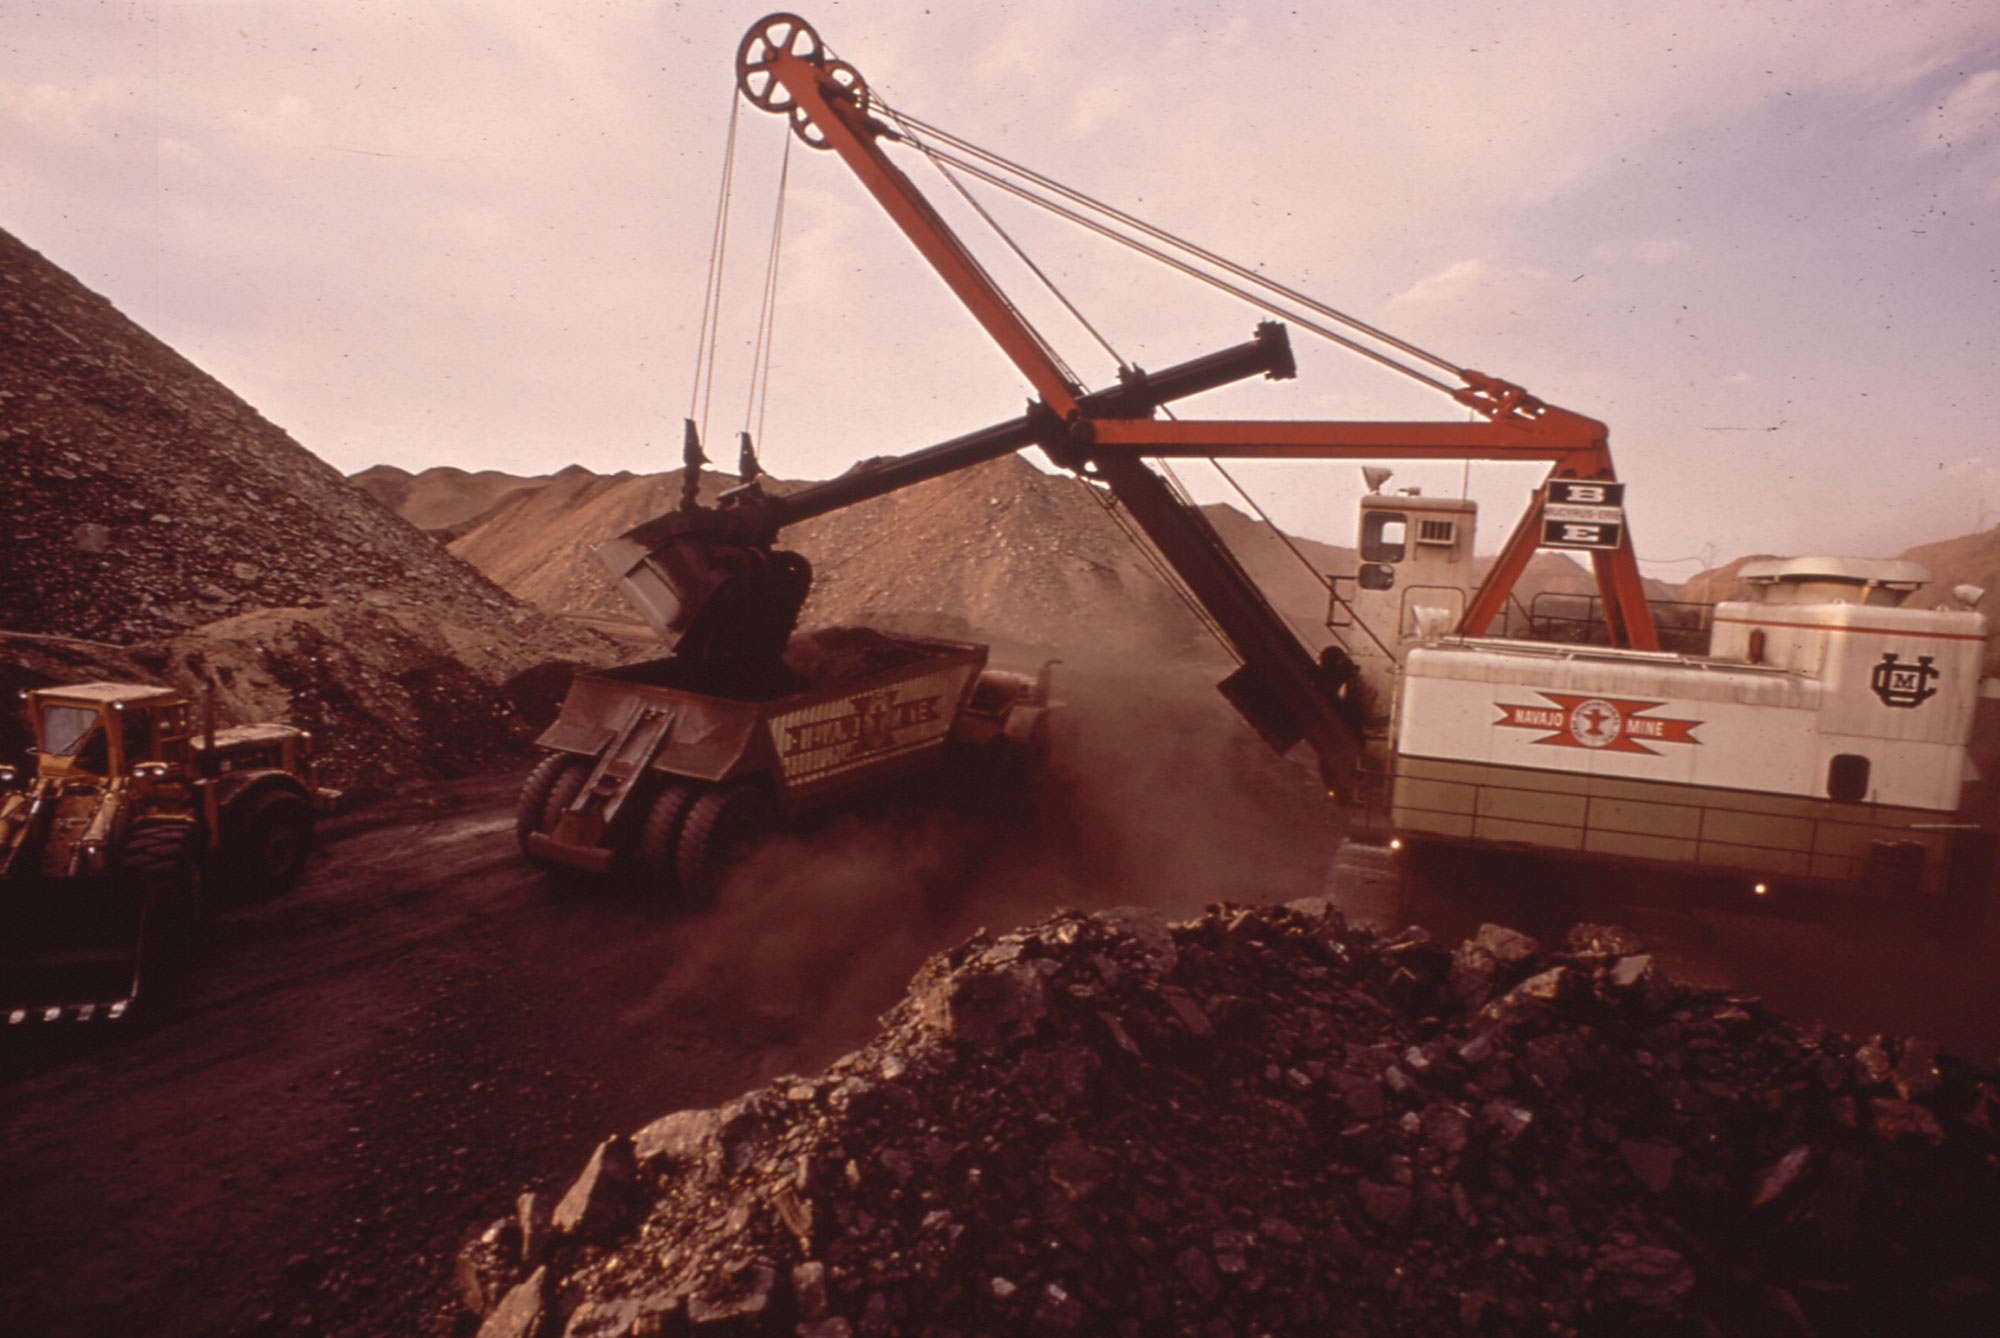 Photo of a strip mining operation in New Mexico. A large shovel operated by a pulley dumps a load of coal into the back of a waiting truck. Mounds of coal can be seen in the foreground and background.